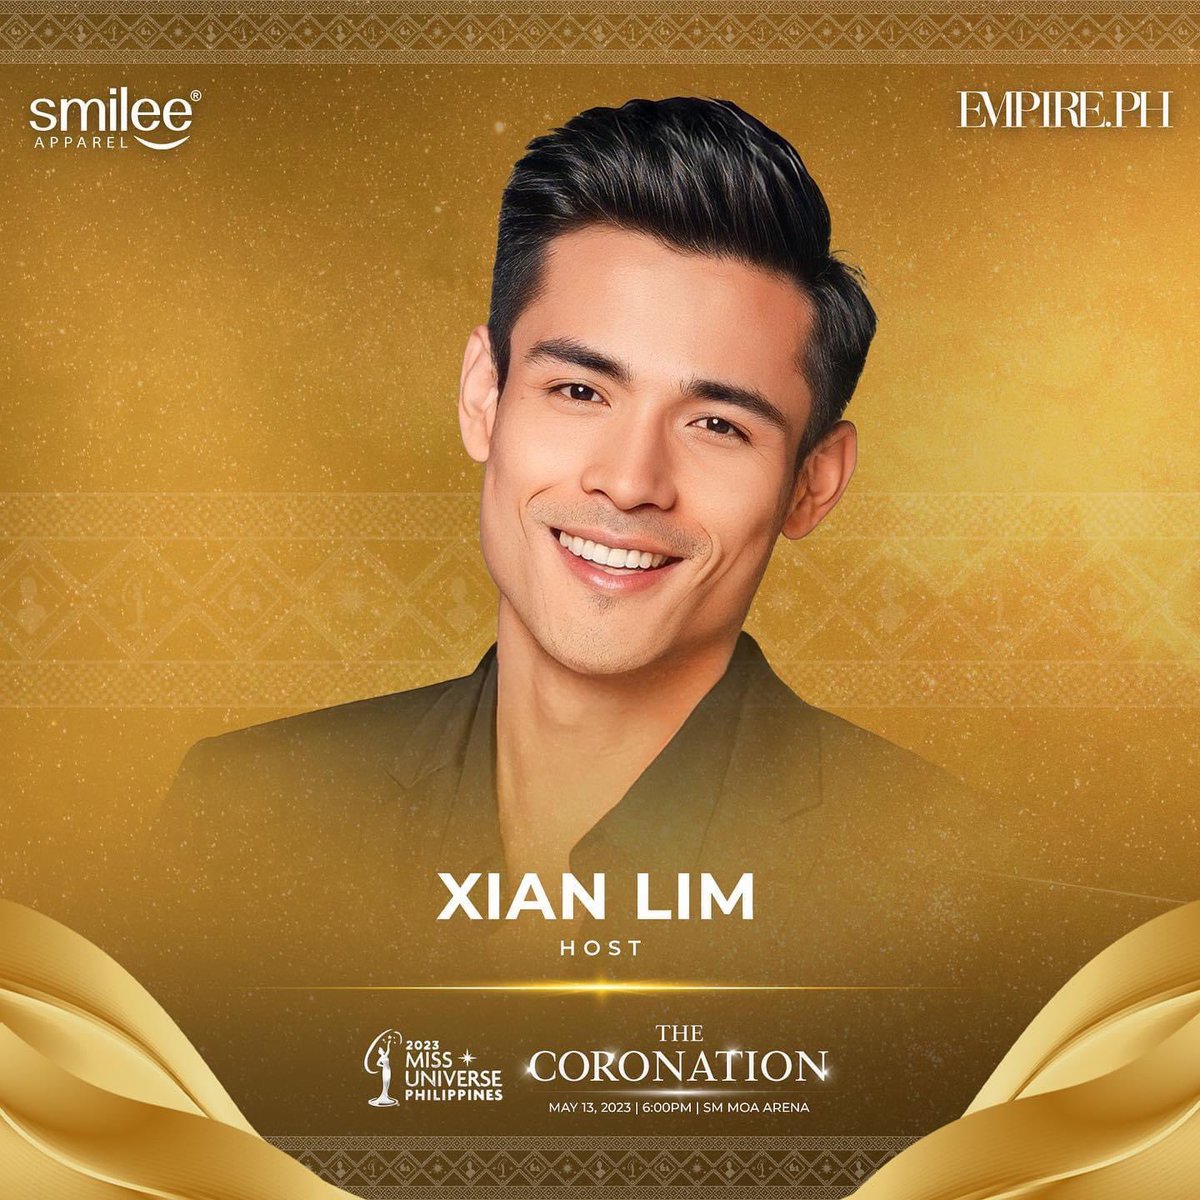 The most beautiful day in the Philippines is in good hands as heartthrob actor and filmaker, Xian Lim, takes the stage as host of the Miss Universe Philippines 2023 Coronation Night on May 13th! Don't miss it! #MissUniversePhilippines #MissUniversePhilippines2023 #MUPH #MUPH23